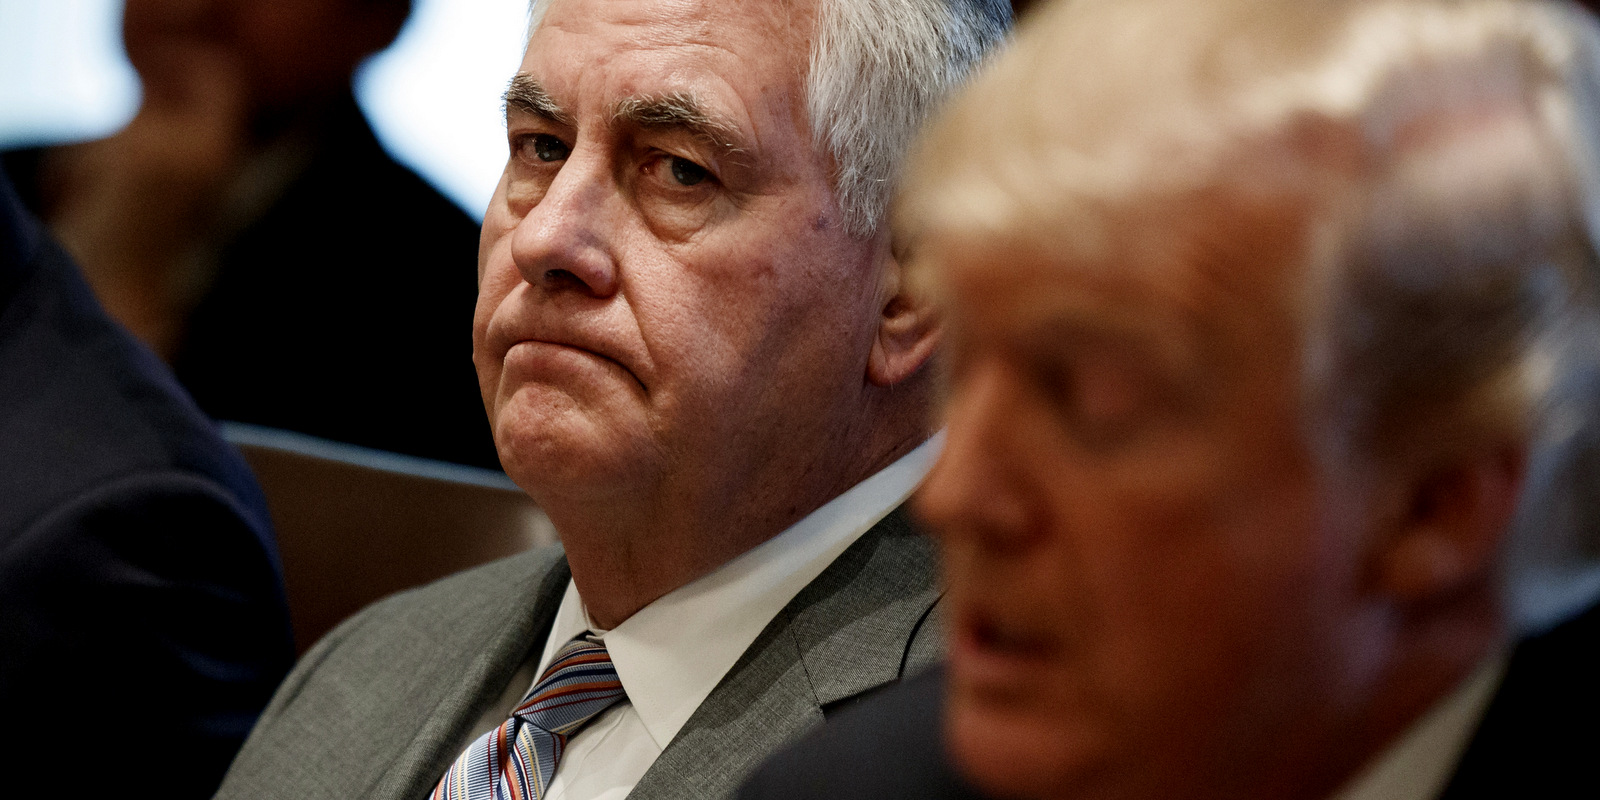 Secretary of State Rex Tillerson listens as President Donald Trump speaks during a cabinet meeting at the White House in Washington. Tillerson is out as secretary of state. President Trump tweeted that he’s naming CIA director Mike Pompeo to replace him, Jan. 10, 2018 . (AP/Evan Vucci)